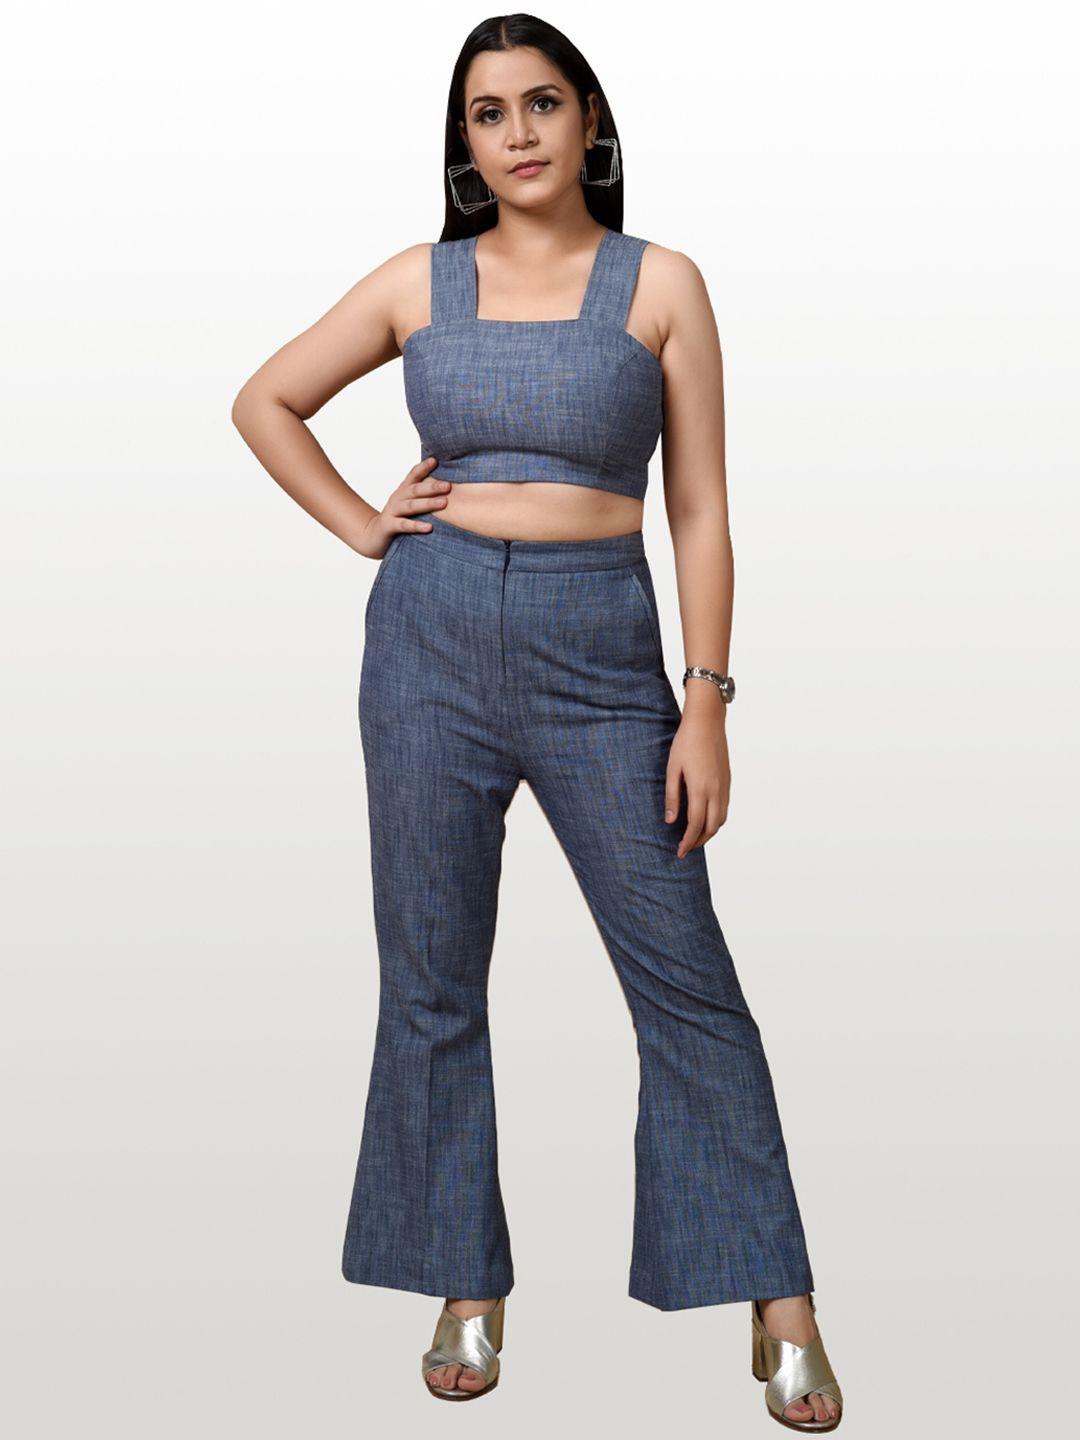 hencemade women blue solid co-ord set